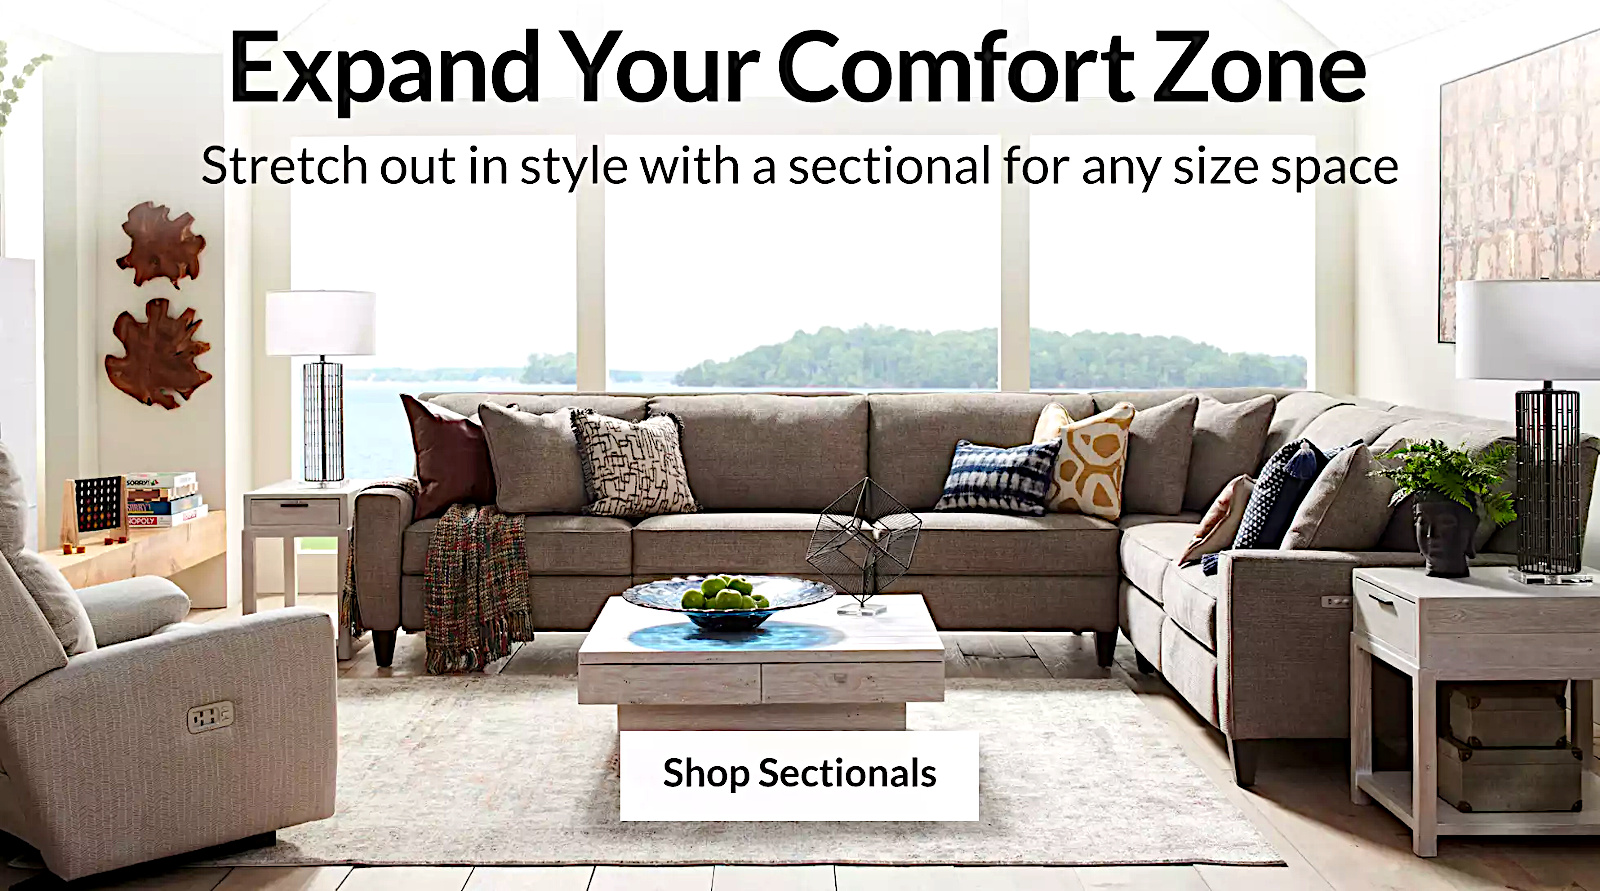 Expand your comfort zone price reduction